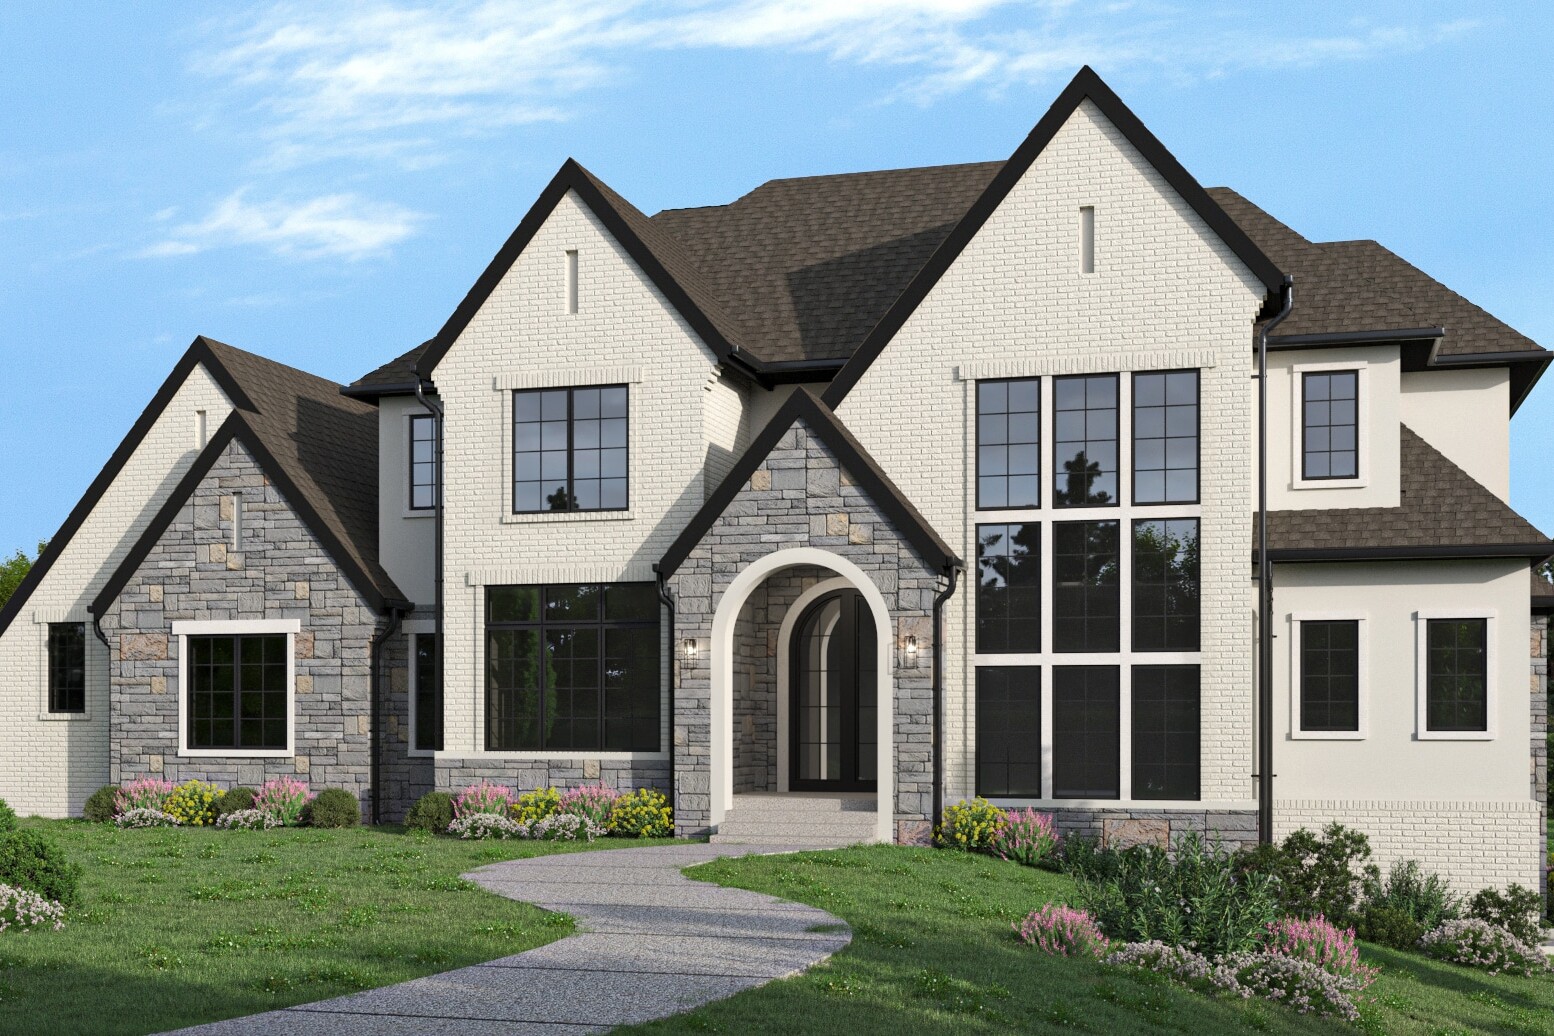 This is a computer rendering of 1719 Asherwood Lane, a home.